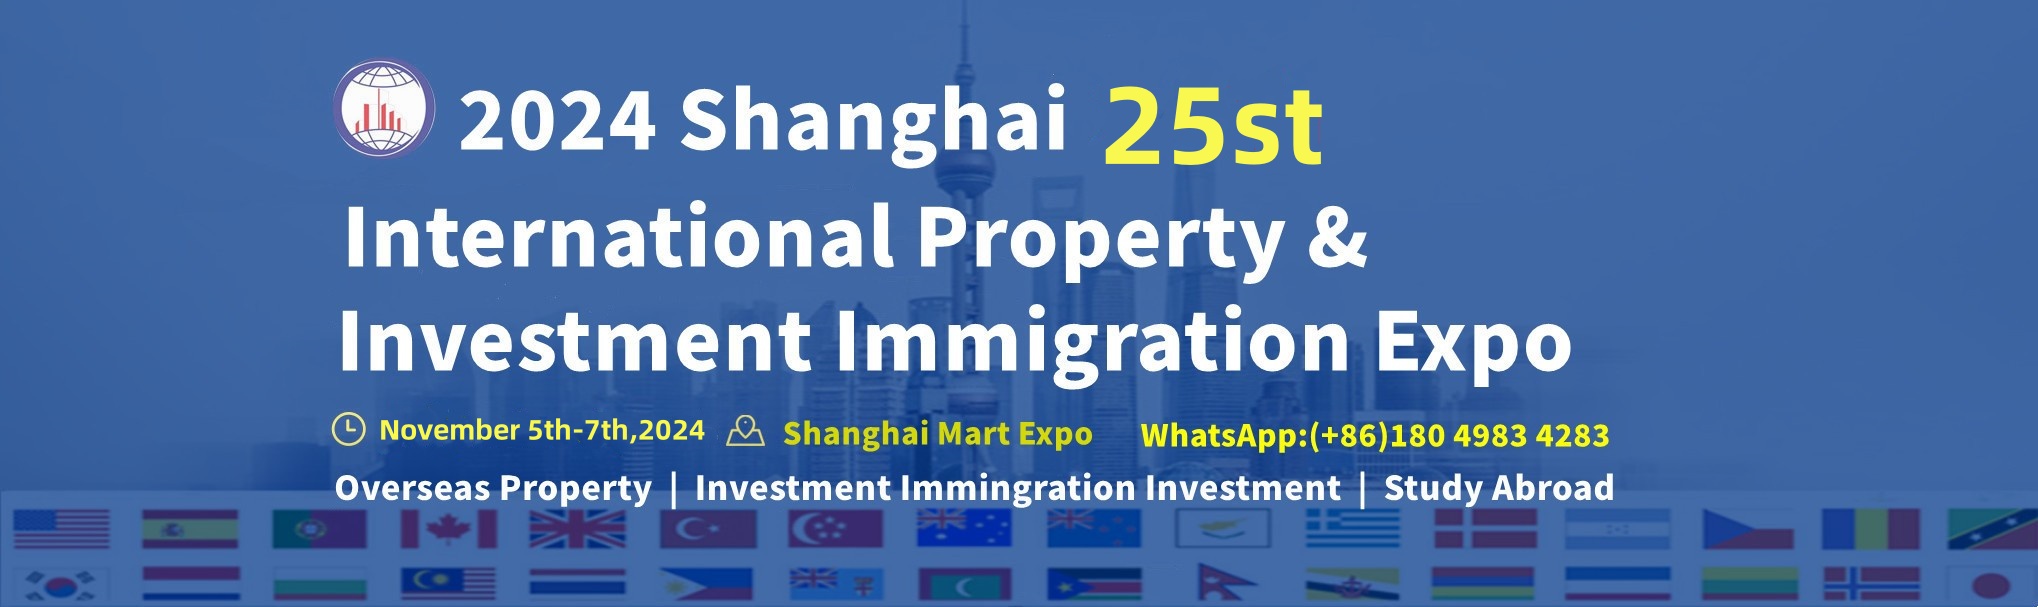 2024 Shanghai 25st International Property & Investment Immigration Expo,2024 Shanghai 25st International Property Expo,Shanghai International Property Expo,Shanghai Investment Immigration Expo,2024 Shanghai Immigration Exhibition,2024 Shanghai Overseas Property Exhibition,Investment Immigration Expo,International Property Expo,oversea property exhibition,Overseas investment exhibition,property exhibition,Overseas Property Exhibition,Immigration and Study Abroad Exhibition,Investment Exhibition,Shanghai Study Abroad Exhibition,Overseas Property Immigration Exhibition,2024 Overseas Property Immigration Exhibition,Immigration Exhibition,Investment Immigration Exhibition,Study Abroad Exhibition,Overseas Property Exhibition,Real Estate Exhibition,Overseas Property Investment Exhibition,Shanghai Overseas Property Investment Exhibition,Shanghai Overseas Property Immigration and Study Abroad Exhibition,Shanghai Overseas Property Immigration and Study Abroad Exhibition,Overseas Property Exhibition,Shanghai Property Exhibition,Overseas Property Exhibition,Shanghai Overseas Real Estate Exhibition, Shanghai International Real Estate Exhibition, Shanghai Overseas Real Estate Investment Immigration Exhibition, Overseas Study Abroad Exhibition, Pension Real Estate Exhibition, Training and Education Exhibition, International Real Estate Exhibition, Real Estate Exhibition, China Real Estate Exhibition, Immigration and Study Abroad Exhibition, Study Abroad & Immigration Exhibition,Real Estate Fair,International Real Estate Exhibition,Overseas Real Estate Exhibition,China Real Estate Exhibition,International Real Estate Exhibition,High-end Real Estate Exhibition,Real Estate Shanghai Exhibition,Real Estate Shanghai Exhibition,China Real Estate Exhibition,Overseas Real Estate Exhibition,Overseas Property & Immigration Exhibition,Overseas Property & Study Exhibition,Overseas Property Expo,International Immigration & Study Abroad Exhibition,Shanghai International Property Exhibition,Shanghai Overseas Property & Immigration Exhibition,2024 Domestic Property Exhibition,Study Abroad Exhibition,2024 Investment Immigration Exhibition,2024 Beijing Immigration Exhibition,2024 Shanghai Immigration Abroad,2024 Overseas Study Exhibition Time Table,2024 Overseas Property Immigration and Study Abroad Exhibition,2024 Study Abroad Exhibition,Immigration and Study Abroad Exhibition 2024,2024 Shanghai Overseas Exhibition,2024 Shanghai Immigration Exhibition,2024 Shanghai Study Abroad Education Exhibition Time,2024 Study Abroad Exhibition,Study Abroad Exhibition,Study Abroad Exhibition 2024,Overseas Property Immigration Exhibition,2024 Shanghai Overseas Property Exhibition,2024 Shanghai Real Estate Exhibition,2024 Shanghai Overseas Real Estate Exhibition Schedule,Overseas Real Estate Exhibition,2024 (Shanghai Real Estate Exhibition),Immigration Expo,Venture Capital Immigration Exhibition,Investment Immigration and Study Abroad Exhibition,Immigration Real Estate Exhibition,Real Estate Exhibition,Shanghai Real Estate Exhibition,Shanghai Real Estate Exhibition,Shanghai Real Estate Exhibition,Shanghai Overseas Property Investment & Immigration & Study Abroad Exhibition,Guangzhou Overseas Property Exhibition,Australian Property Fair,Overseas Property Immigration & Study Exhibition,Overseas Property & Immigration Exhibition,Shanghai Overseas Real Estate Expo,International Immigration Expo,Shanghai Overseas Real Estate,Overseas Real Estate,Overseas Real Estate,Investment,Immigration,Real Estate Immigration,Real Estate International,International Real Estate,Immigration & Study,Study Abroad,Shanghai Overseas Real Estate,Shanghai Immigration,Immigration Shanghai,Apartment,International School,High-end Property,Pension Real Estate,Bank,Law Firm,International Commercial Real Estate Exhibition,Housing Exhibition,Tourism Real Estate,Global Real Estate Investment Exhibition,High-end Real Estate Investment Exhibition,Villa,Resort Hotel,Castle,Ski Villa,Marina,Sea View Room,Tourism Real Estate,Overseas Immigration Agency,Consulting Service Agency,Investment Immigration,Intermediary Agency,EB-5 Regional Center,Finance,Private Equity Firms,Immigration Services,Shanghai Immigration Exhibition,Shanghai Overseas Property Expo,2024 Shanghai 23rd Overseas Property Immigration and Study Abroad Exhibition,2024 Immigration Exhibition,2024 Investment Immigration Exhibition,2024 Study Abroad Expo,2024 Overseas Property Exhibition,2024 Overseas Property Exhibition,2024 Overseas Property Investment Exhibition,2024 Shanghai Overseas Property Investment Exhibition,2024 International Overseas Property Immigration Investment and Study Abroad Exhibition,2024 Shanghai Overseas Property Immigration & Study Abroad Exhibition,2024 Overseas Property Exhibition,2024 International Property Exhibition,2024 Shanghai Property Exhibition,2024 Overseas Property Exhibition,2024 Shanghai Overseas Property Exhibition,2024 Shanghai International Property Exhibition,2024 Shanghai Overseas Property Investment & Immigration Exhibition,2024 Overseas Study Expo,2024 Senior Property Exhibition,2024 Training and Education Exhibition,2024 International Property Exhibition,2024 Property Exhibition,2024 China Property Exhibition,2024 Immigration & Study Expo,2024 Overseas Property Fair,2024 International Property Fair,2024 Overseas Property Exhibition,2024 China Property Expo,2024 International Property Expo,2024 High-end Property Expo,2024 Property Shanghai Exhibition,2024 Property Shanghai Exhibition,2024 China Property Expo,2024 China Property Expo,2024 Overseas Property Immigration Exhibition,2024 Overseas Property Fair,2024 Overseas Property Expo,2024 International Immigration & Study Expo,2024 Shanghai International Property Expo,2024 Shanghai Study Abroad Expo,2024 China Overseas Property Expo,2024 Immigration & Property Expo,2024 Venture Capital & Immigration Exhibition,2024 Investment Immigration & Study Abroad Expo,2024 Immigration & Property Expo,2024 Real Estate Exhibition,2024 Shanghai Real Estate Exhibition,2024 Real Estate Fair,2024 Shanghai Real Estate Website,2024 Shanghai International Overseas Property Exhibition,2024 Shanghai Real Estate Exhibition,2024 Shanghai Real Estate Fair,2024 Shanghai Overseas Property Investment Immigration and Study Abroad Exhibition,2024 Guangzhou Overseas Property Exhibition,2024 Australian Property Fair,2024 Overseas Property Immigration Exhibition,2024 Overseas Property Immigration Exhibition,2024 Shanghai Overseas Real Estate Expo,2024 International Immigration Expo,www.opiexpo.com,opiexpo.com,2024(Shanghai)The 24st Overseas real estate Immigrant study abroad Exhibition,Overseas Real Estate Exhibition,Overseas Property Exhibition,Overseas Real Estate Investment Exhibition,Immigration Summit Forum,Shanghai High-end Real Estate Immigrant Investment Summit,2024 Shanghai Study Abroad Exhibition,Study Abroad Education Exhibition,Shanghai Study Abroad Fair,Shanghai Overseas Study Fair,Real Estate Exhibition,Shanghai Immigration Exhibition,SHANGHAI OVERSEAS PROPERTY-IMMIGRATION-INVESTMENT EXHIBITION - SHANGHAI EXPO